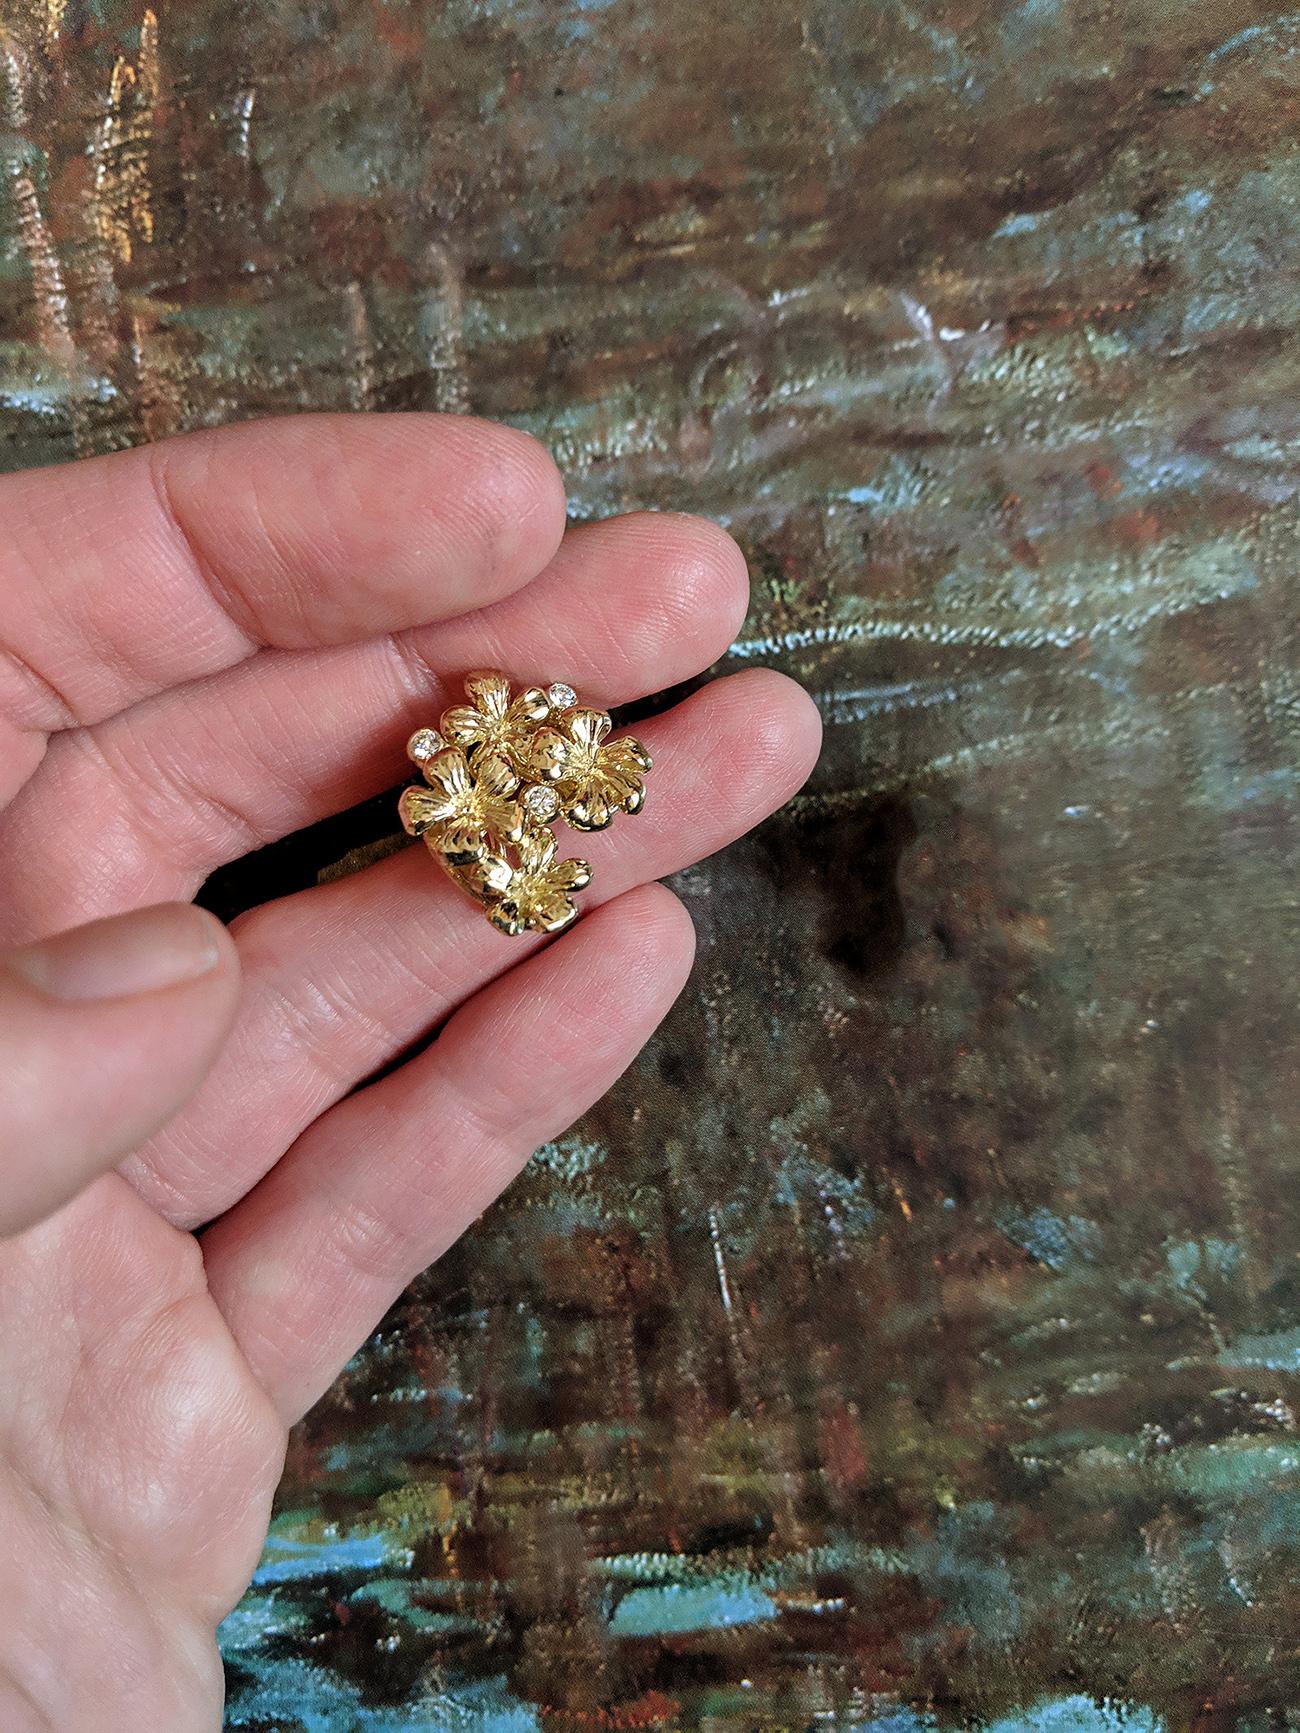 18 karat yellow gold Plum Blossom brooch with a removable lemon quartz drop, encrusted with 3 round diamonds, is a contemporary jewellery piece that has been featured in Vogue UA reviews. The cabochon lemon quartz can be easily replaced with other